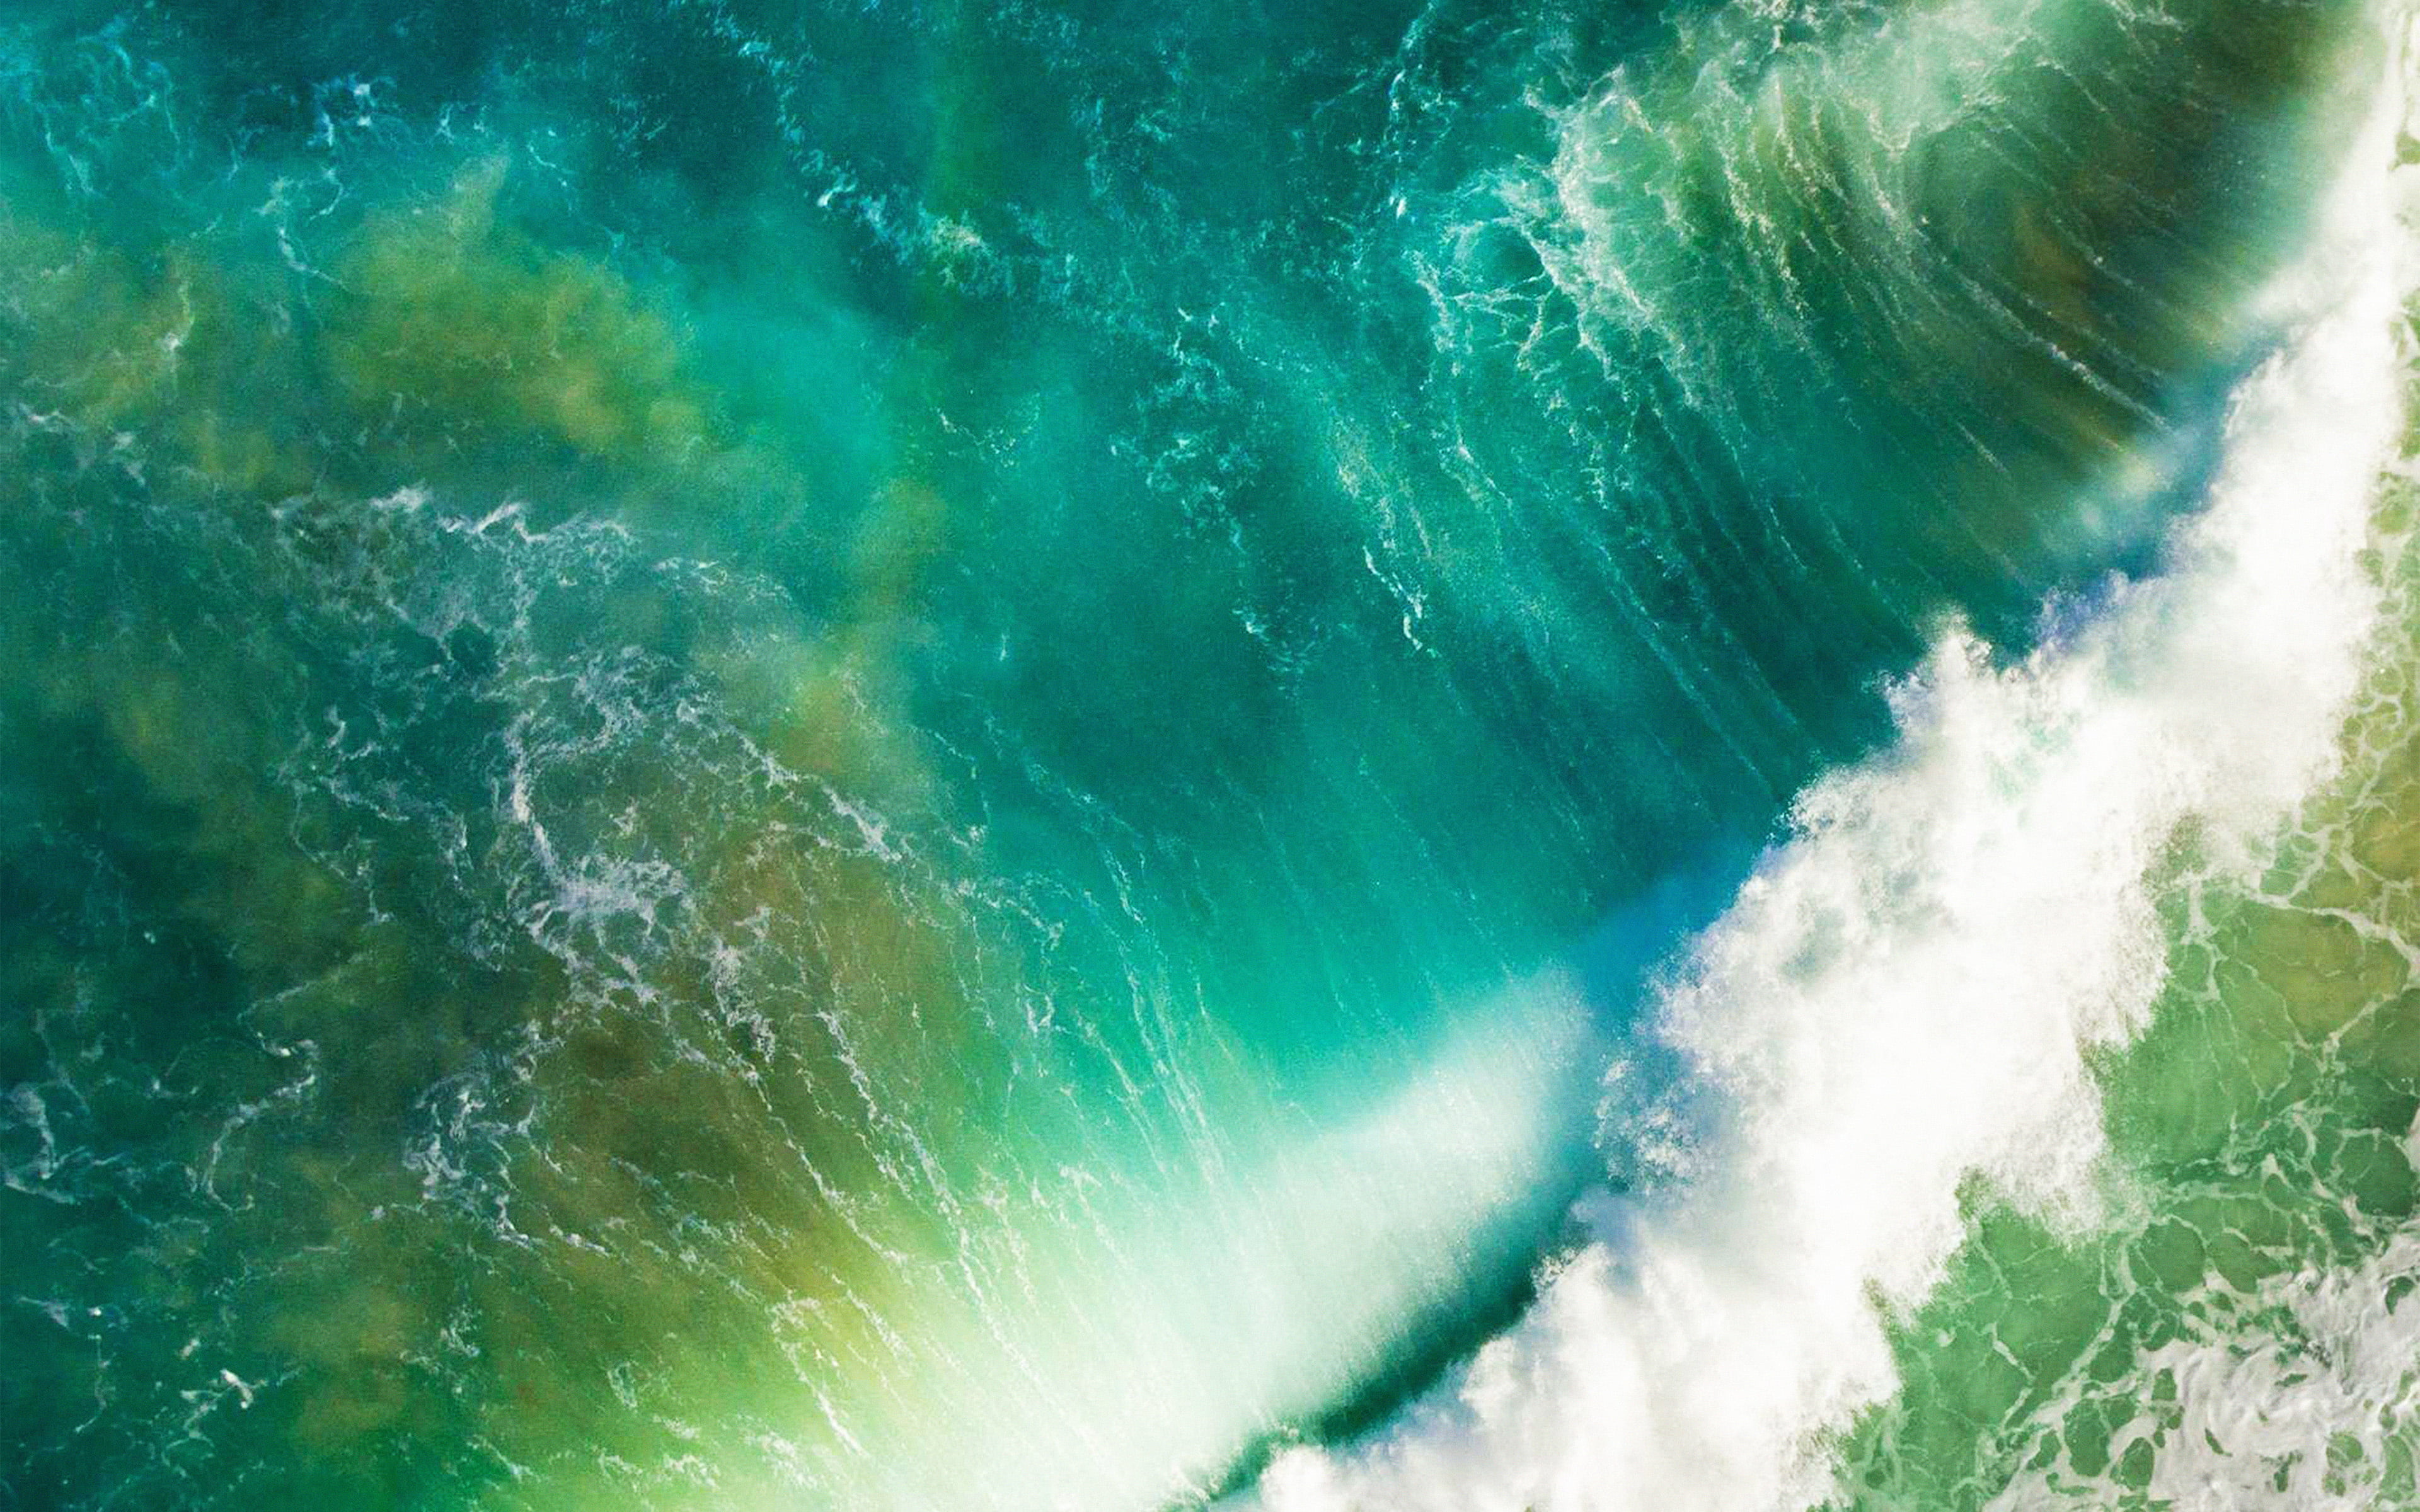 ios10, apple, iphone7, wave, waterfall, official, art, illustration